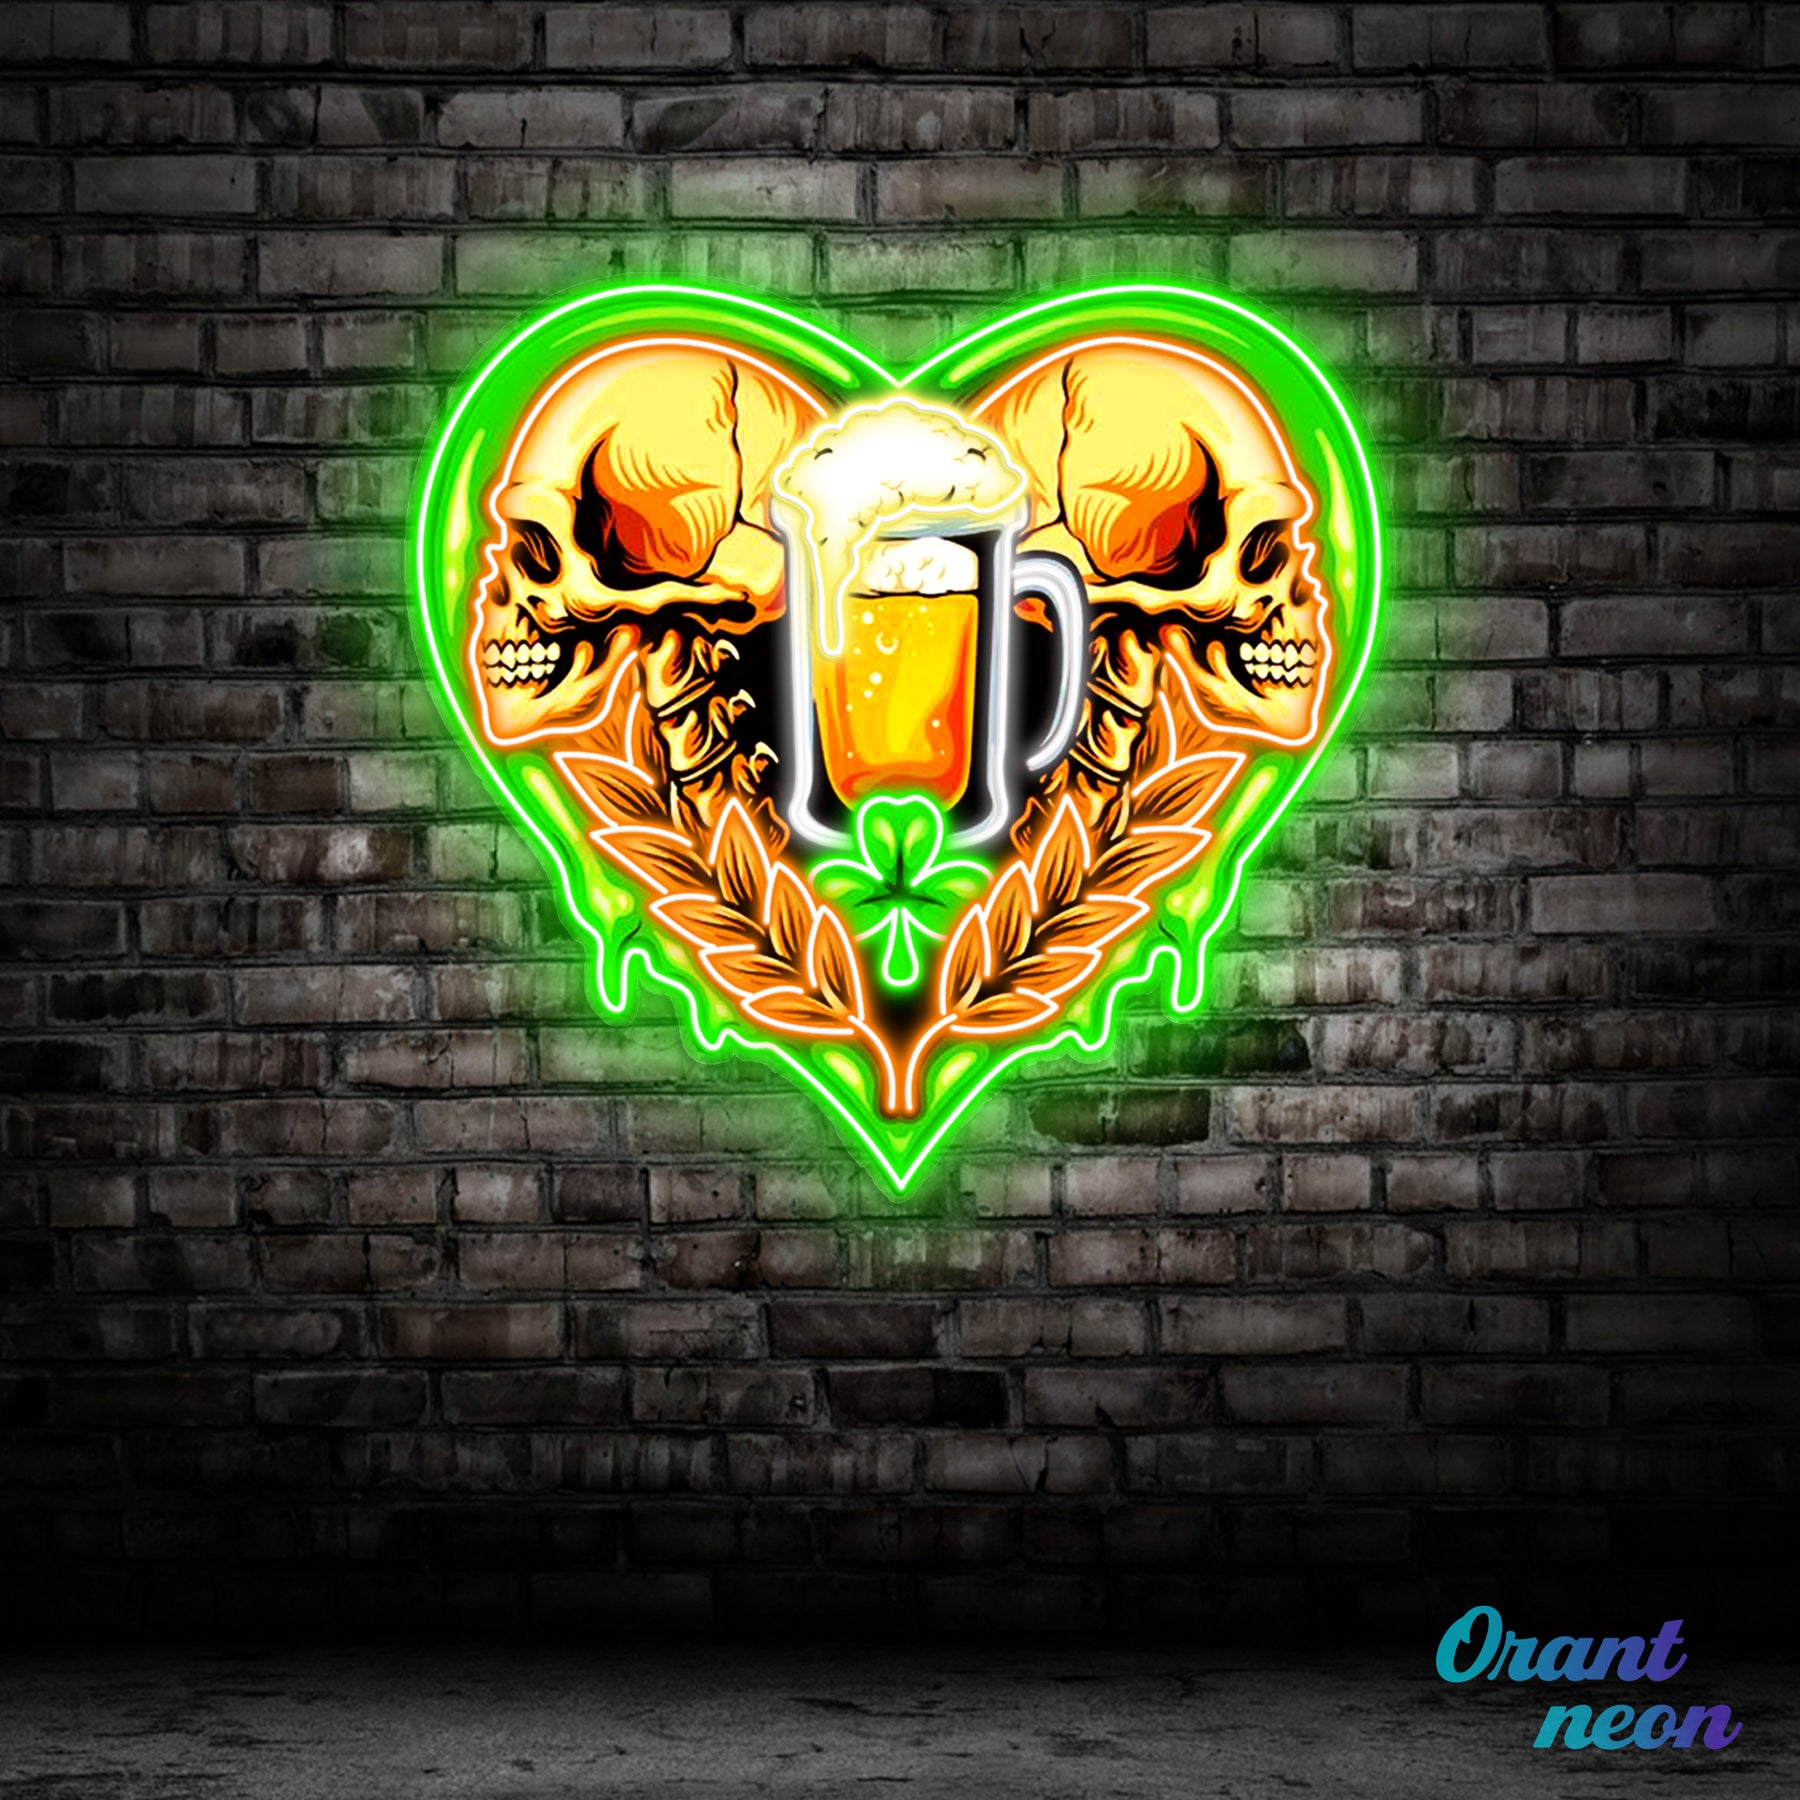 Patrick's Day - The Skull Beer With Heart Led Neon Acrylic Artwork